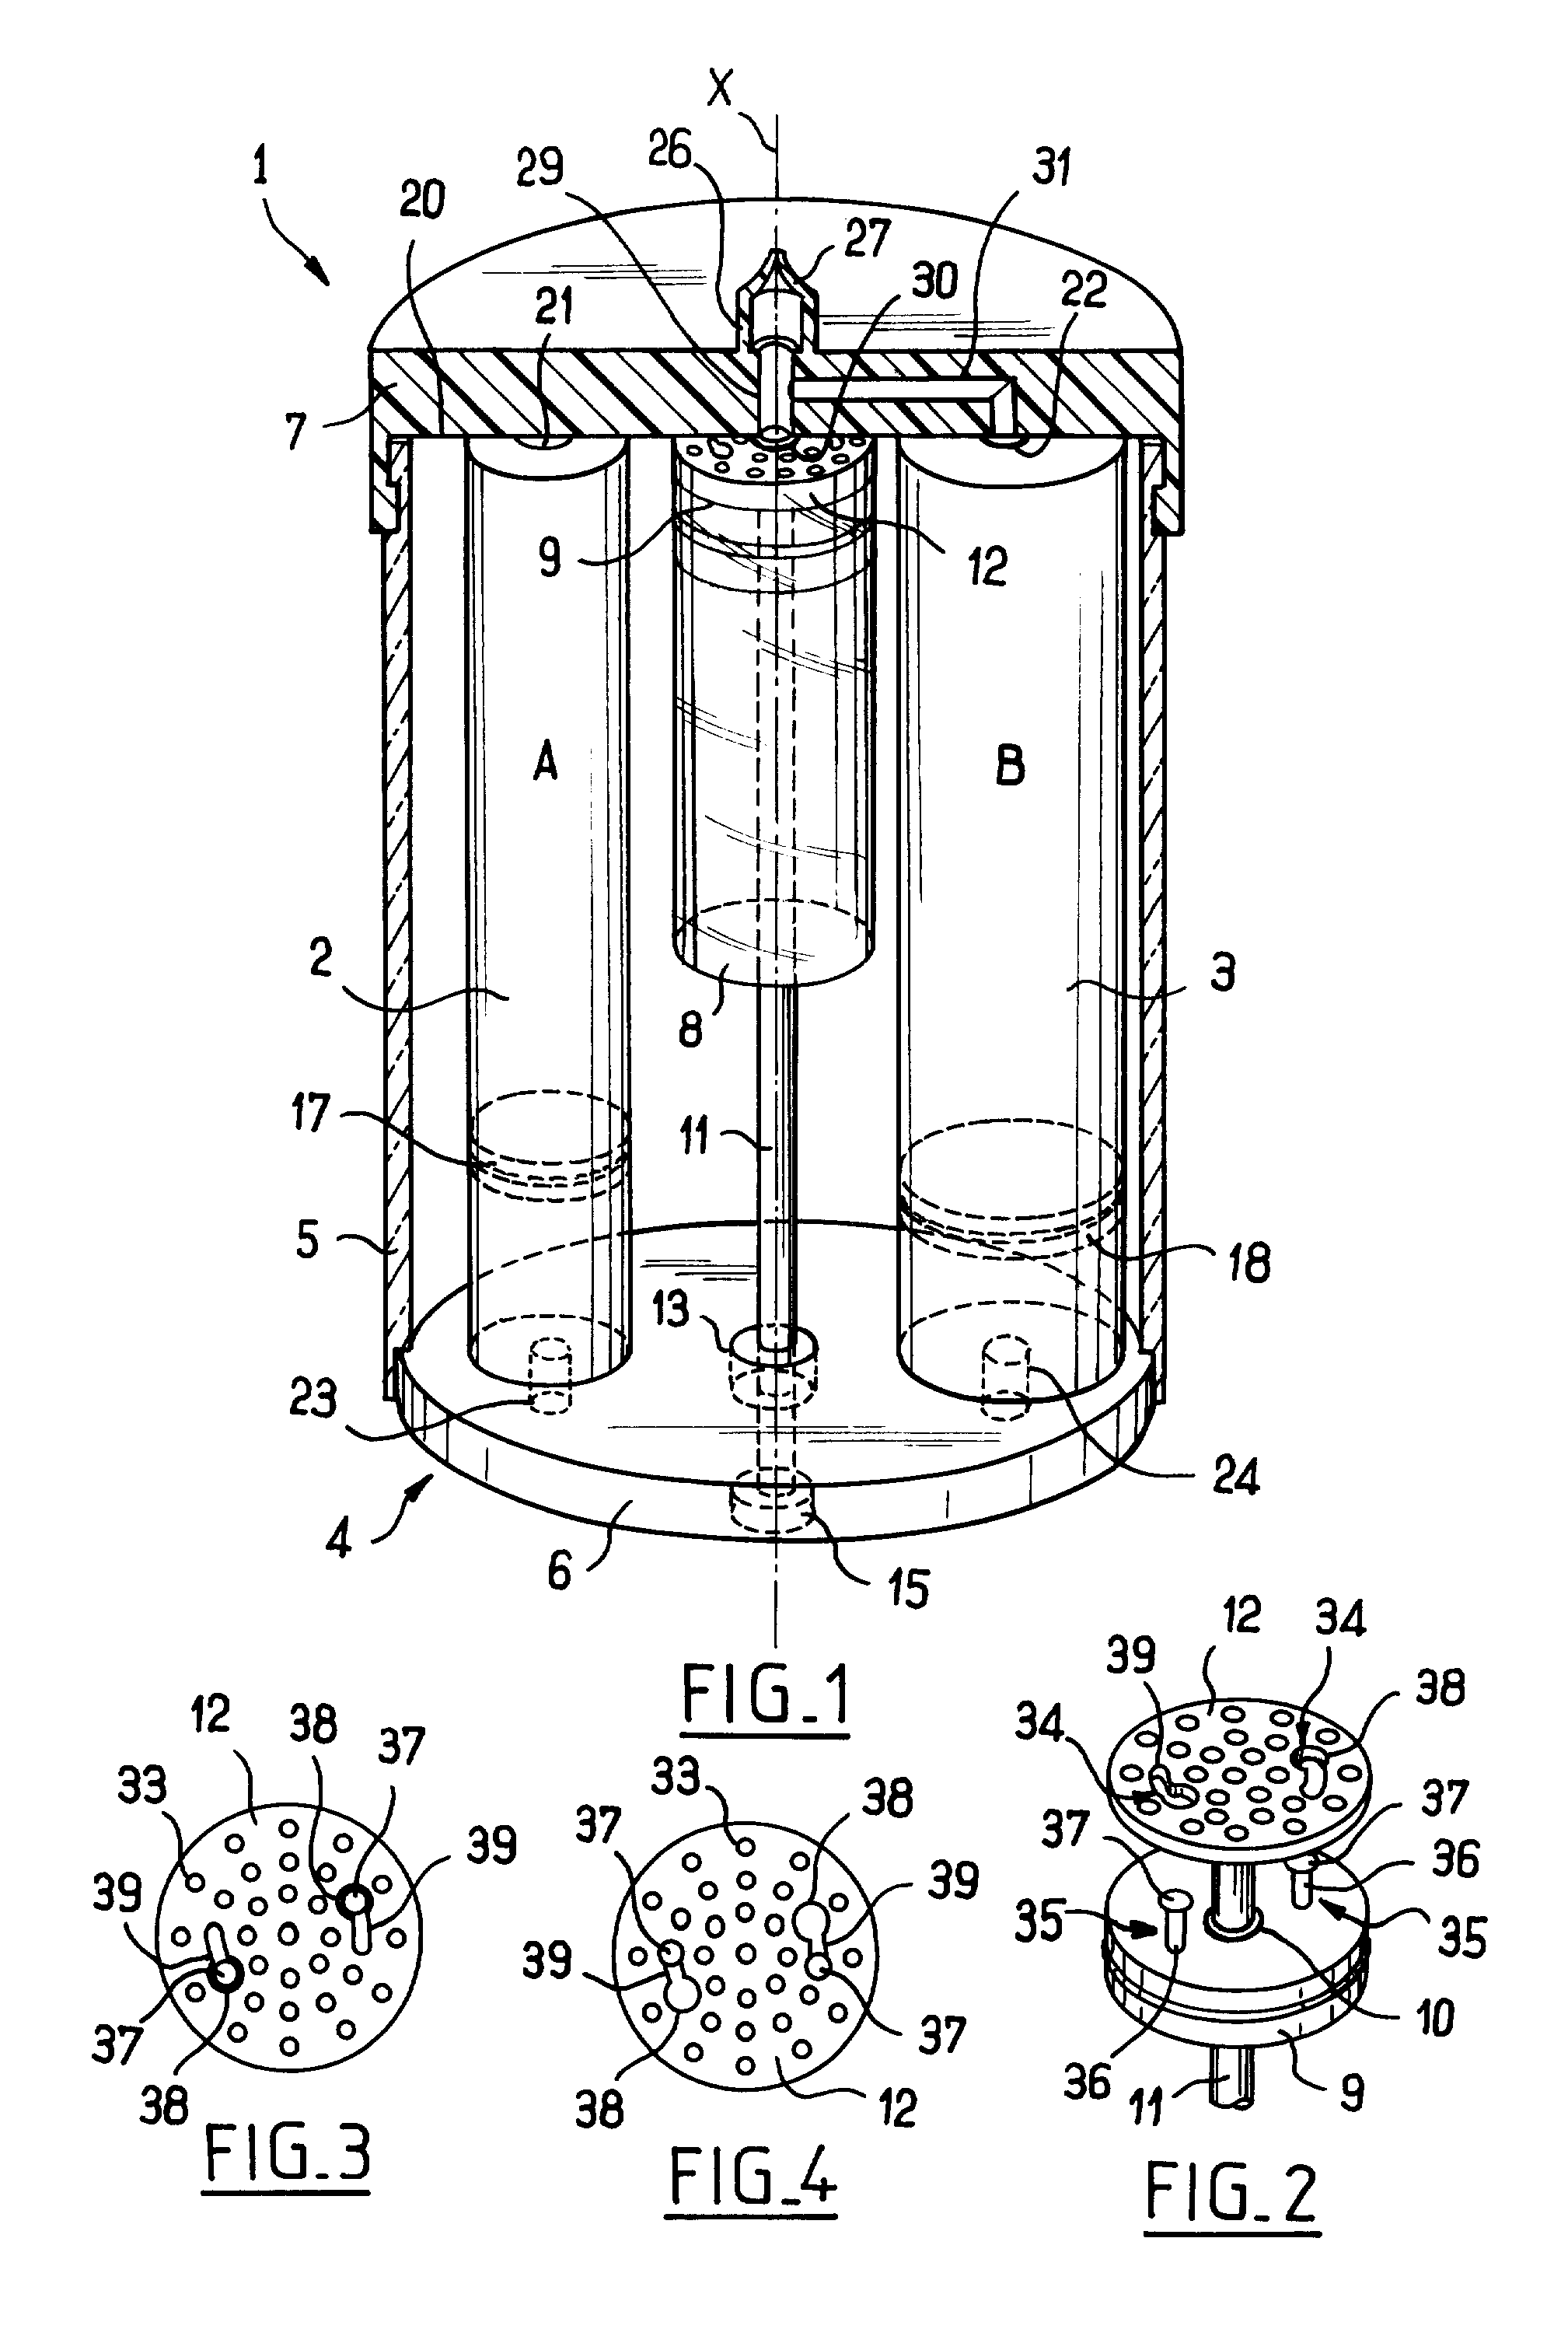 Portable dispenser for packaging and dispensing colored cosmetics